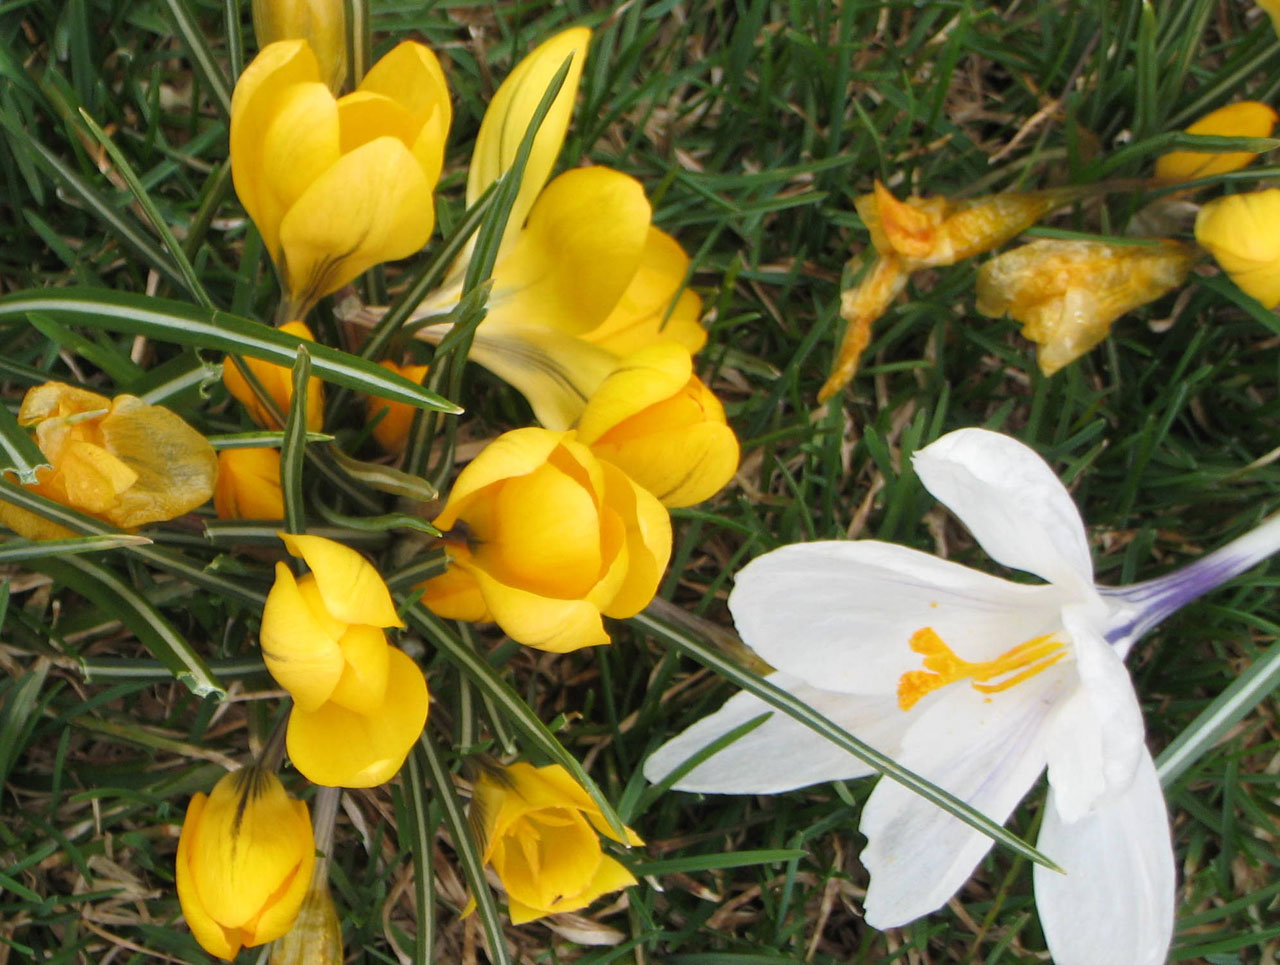 Little group of yellow crocus and one white one,blooming in early spring